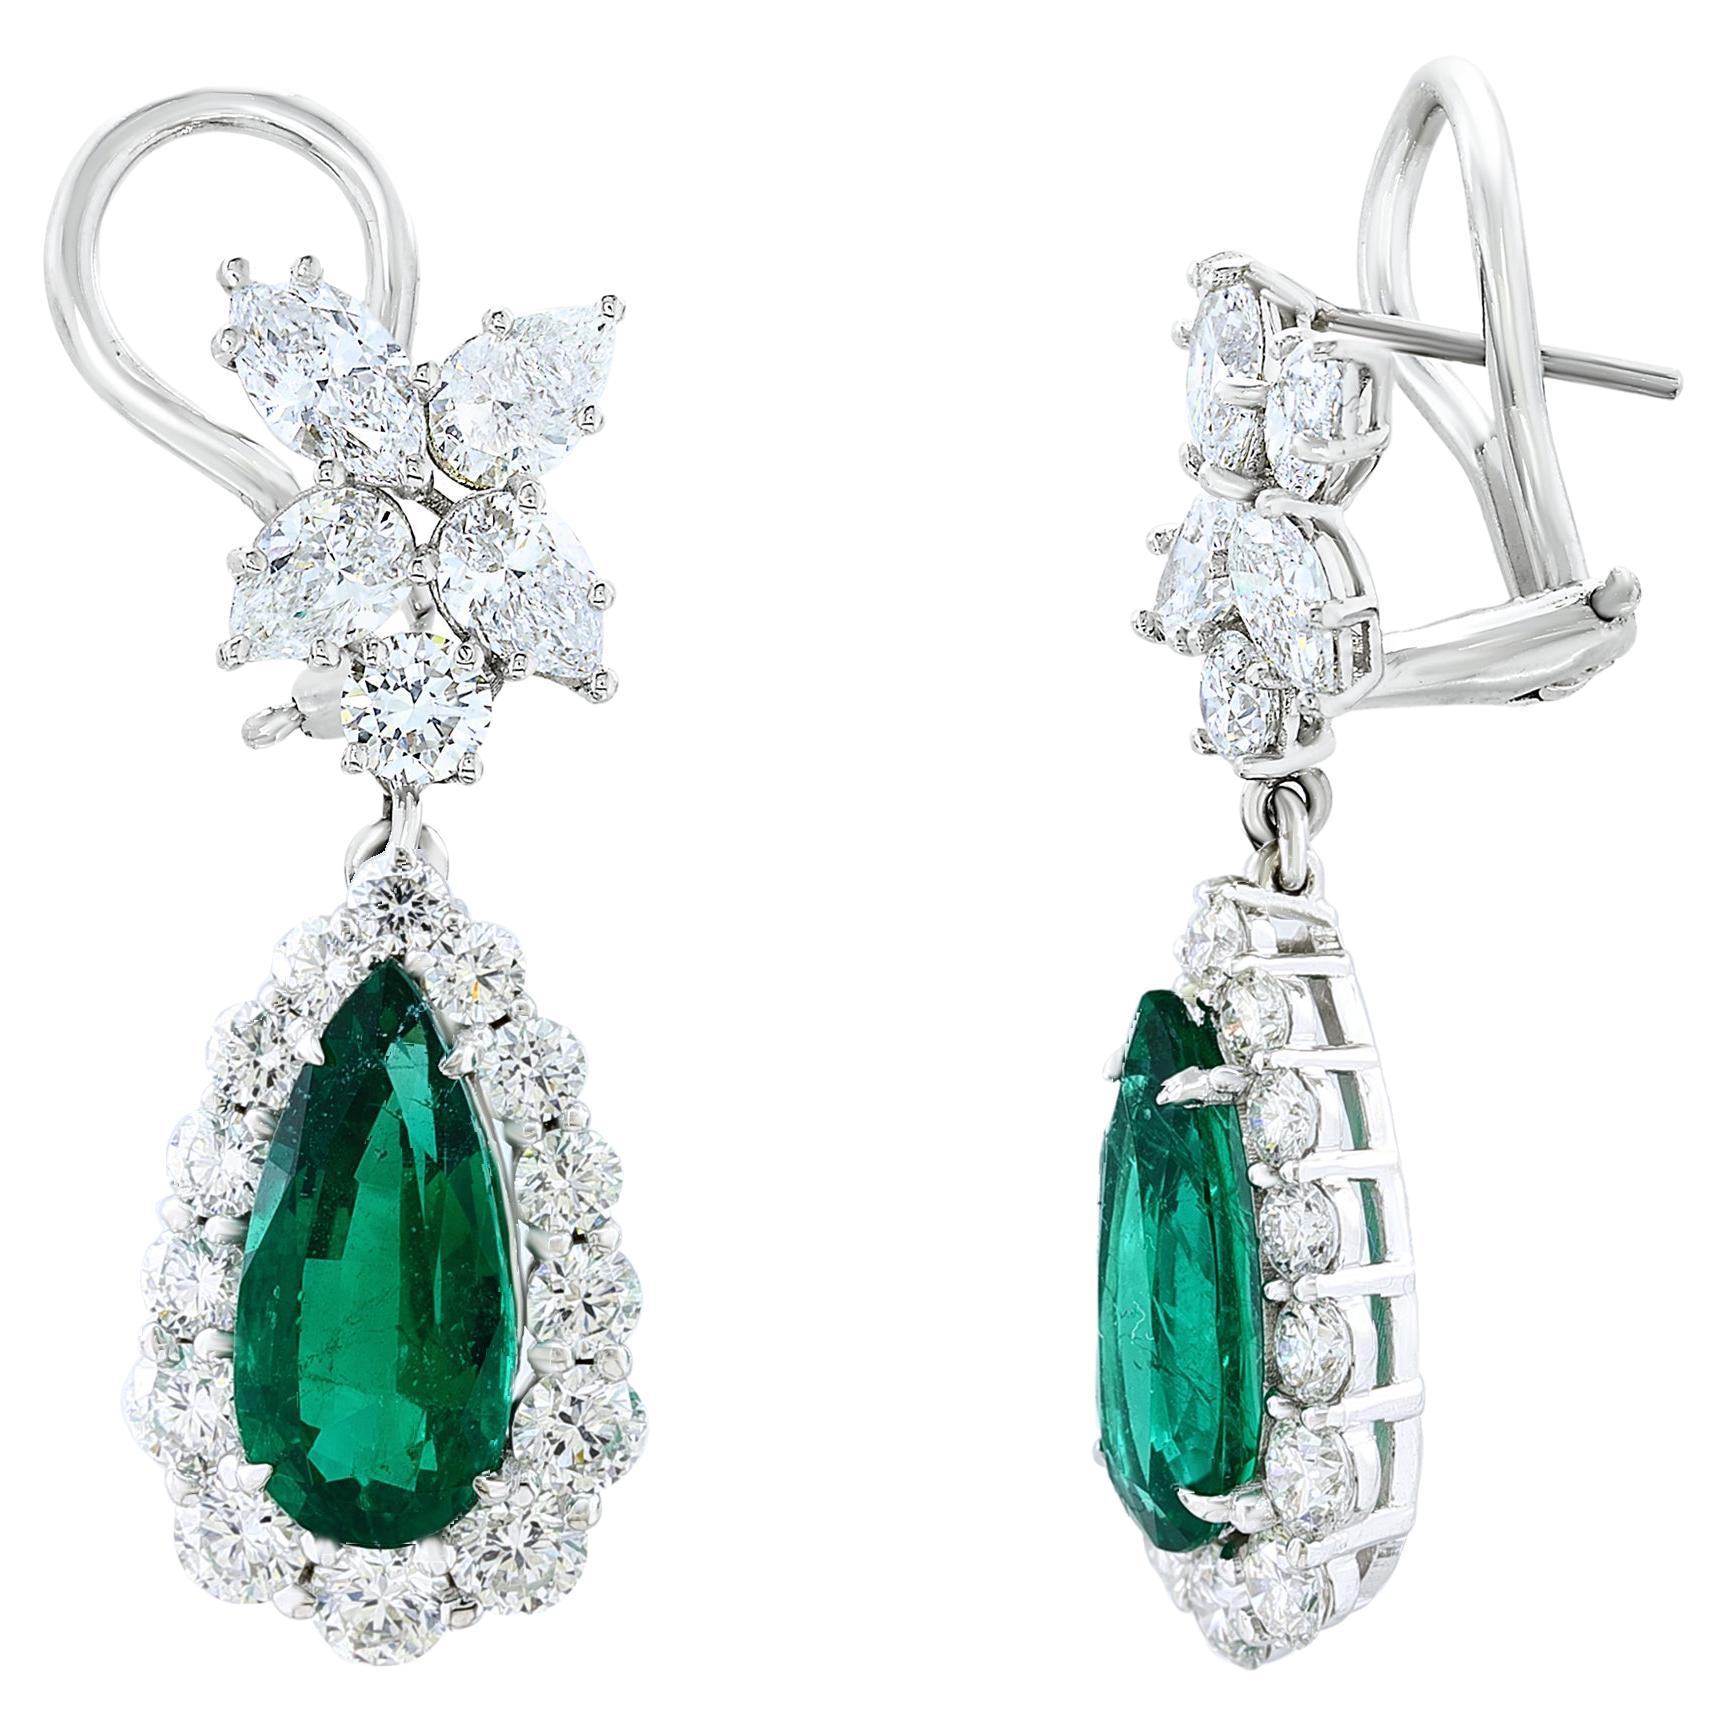 4.80 Carat Pear Shape Emerald and Diamond Drop Earrings in 18K White Gold For Sale